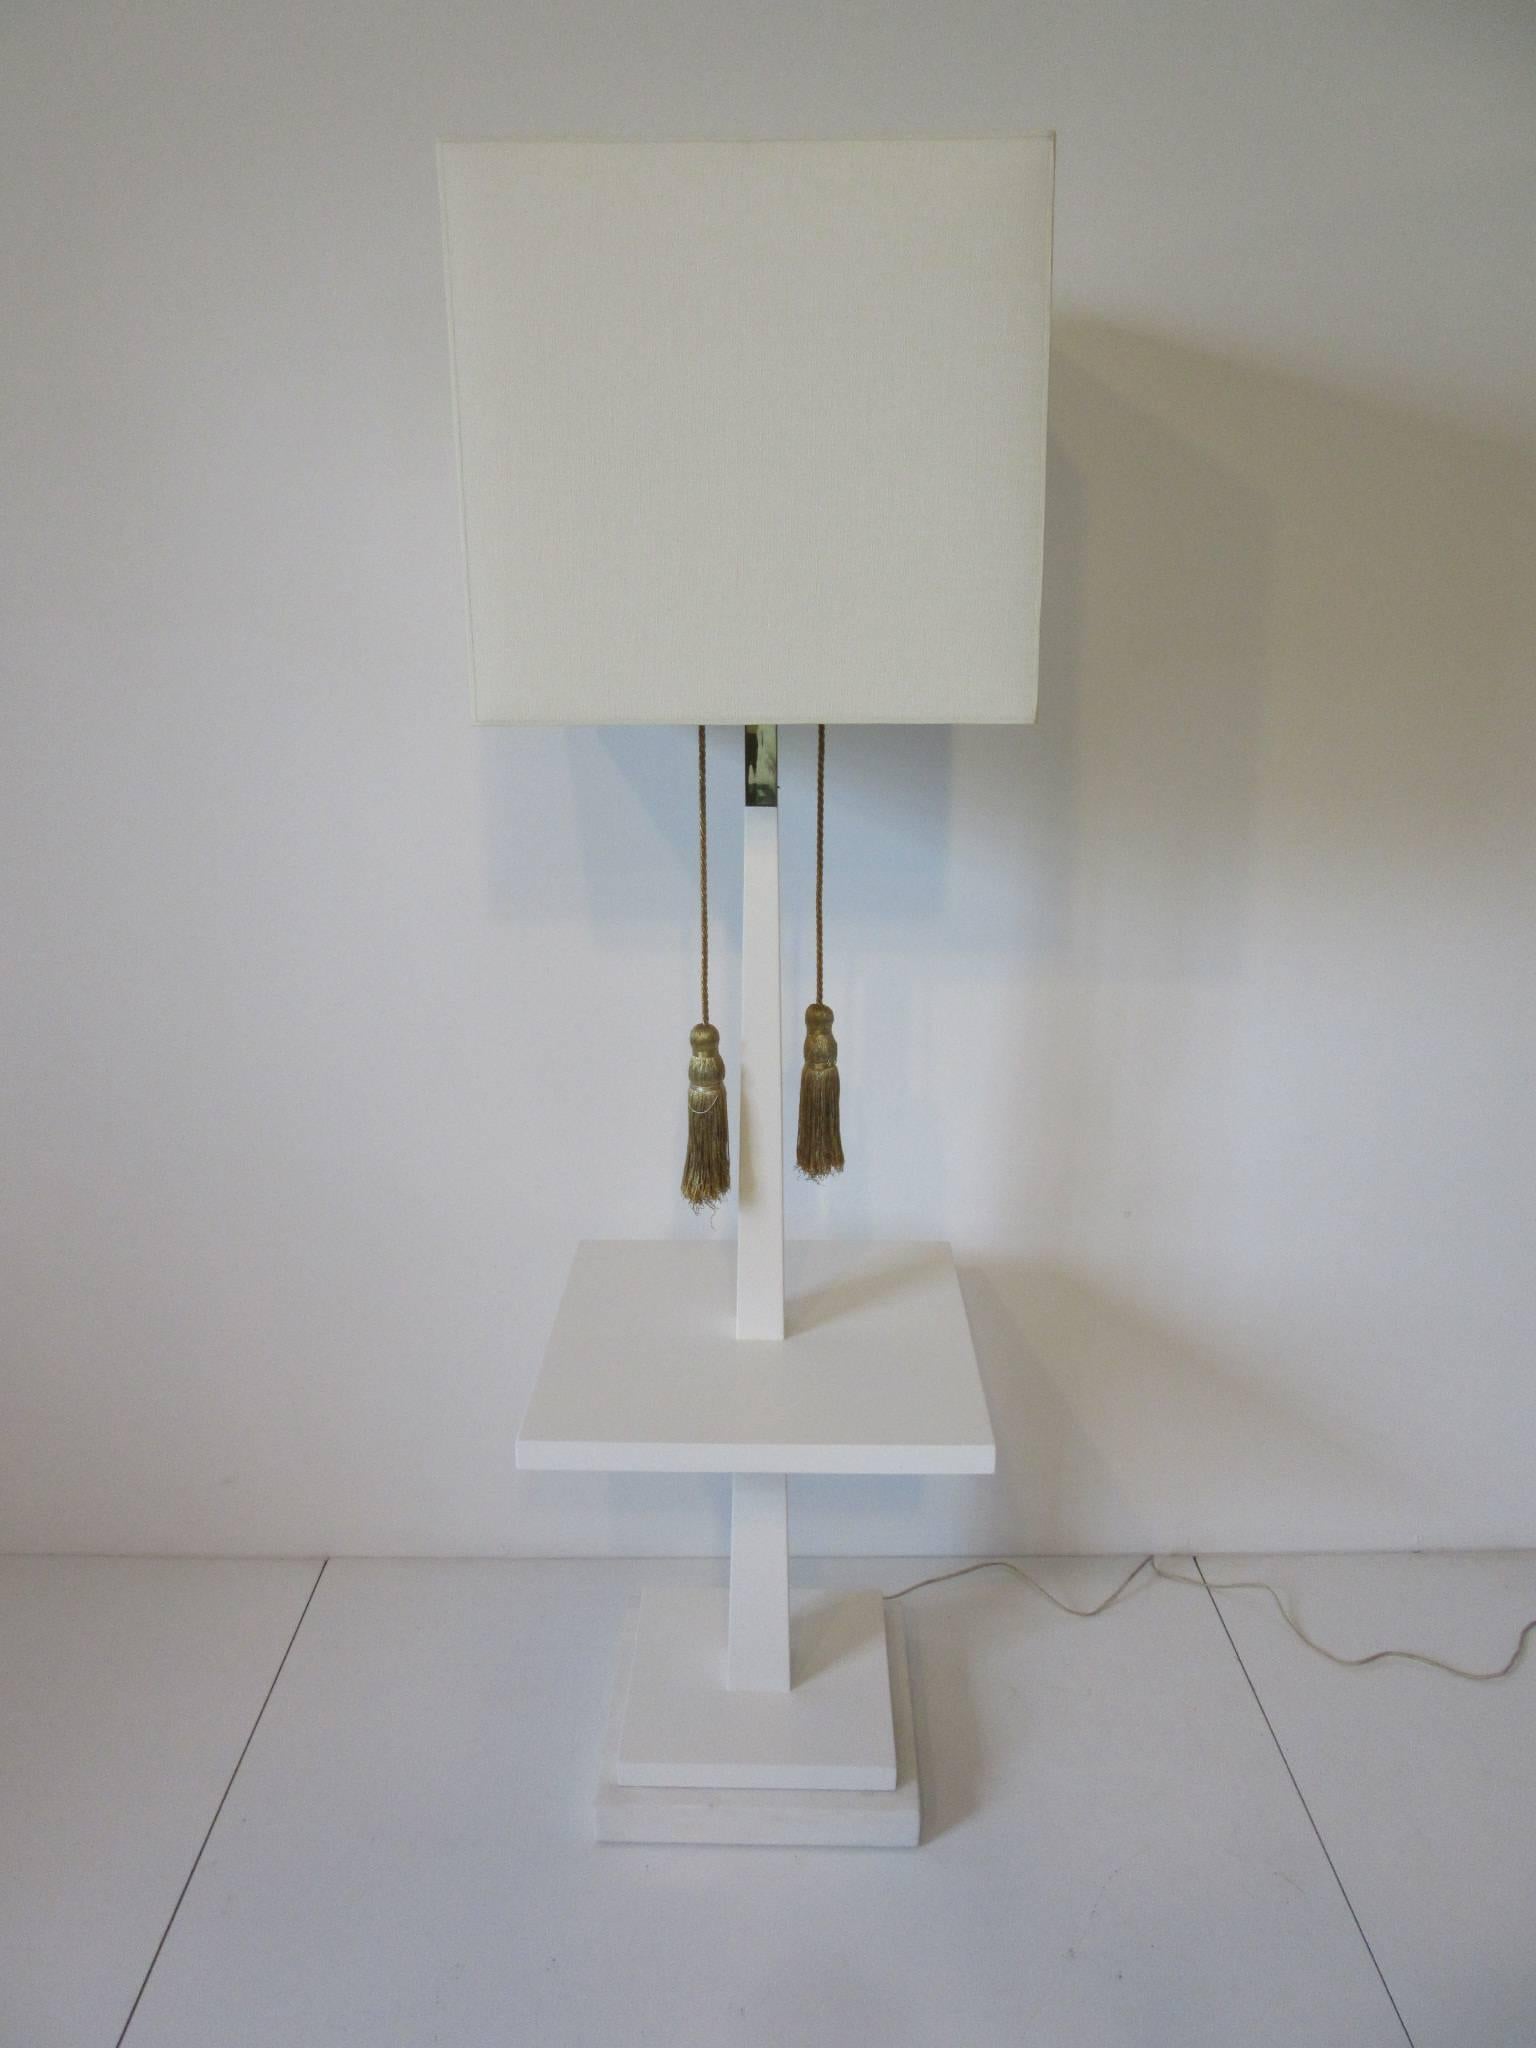 A very well crafted wooden floor lamp with intergraded table sitting on a piece of white Italian Carrera marble as the base . Retains it's original gold braded pulls and end tassels with an accent of brass to the center shaft . Retains the imprinted